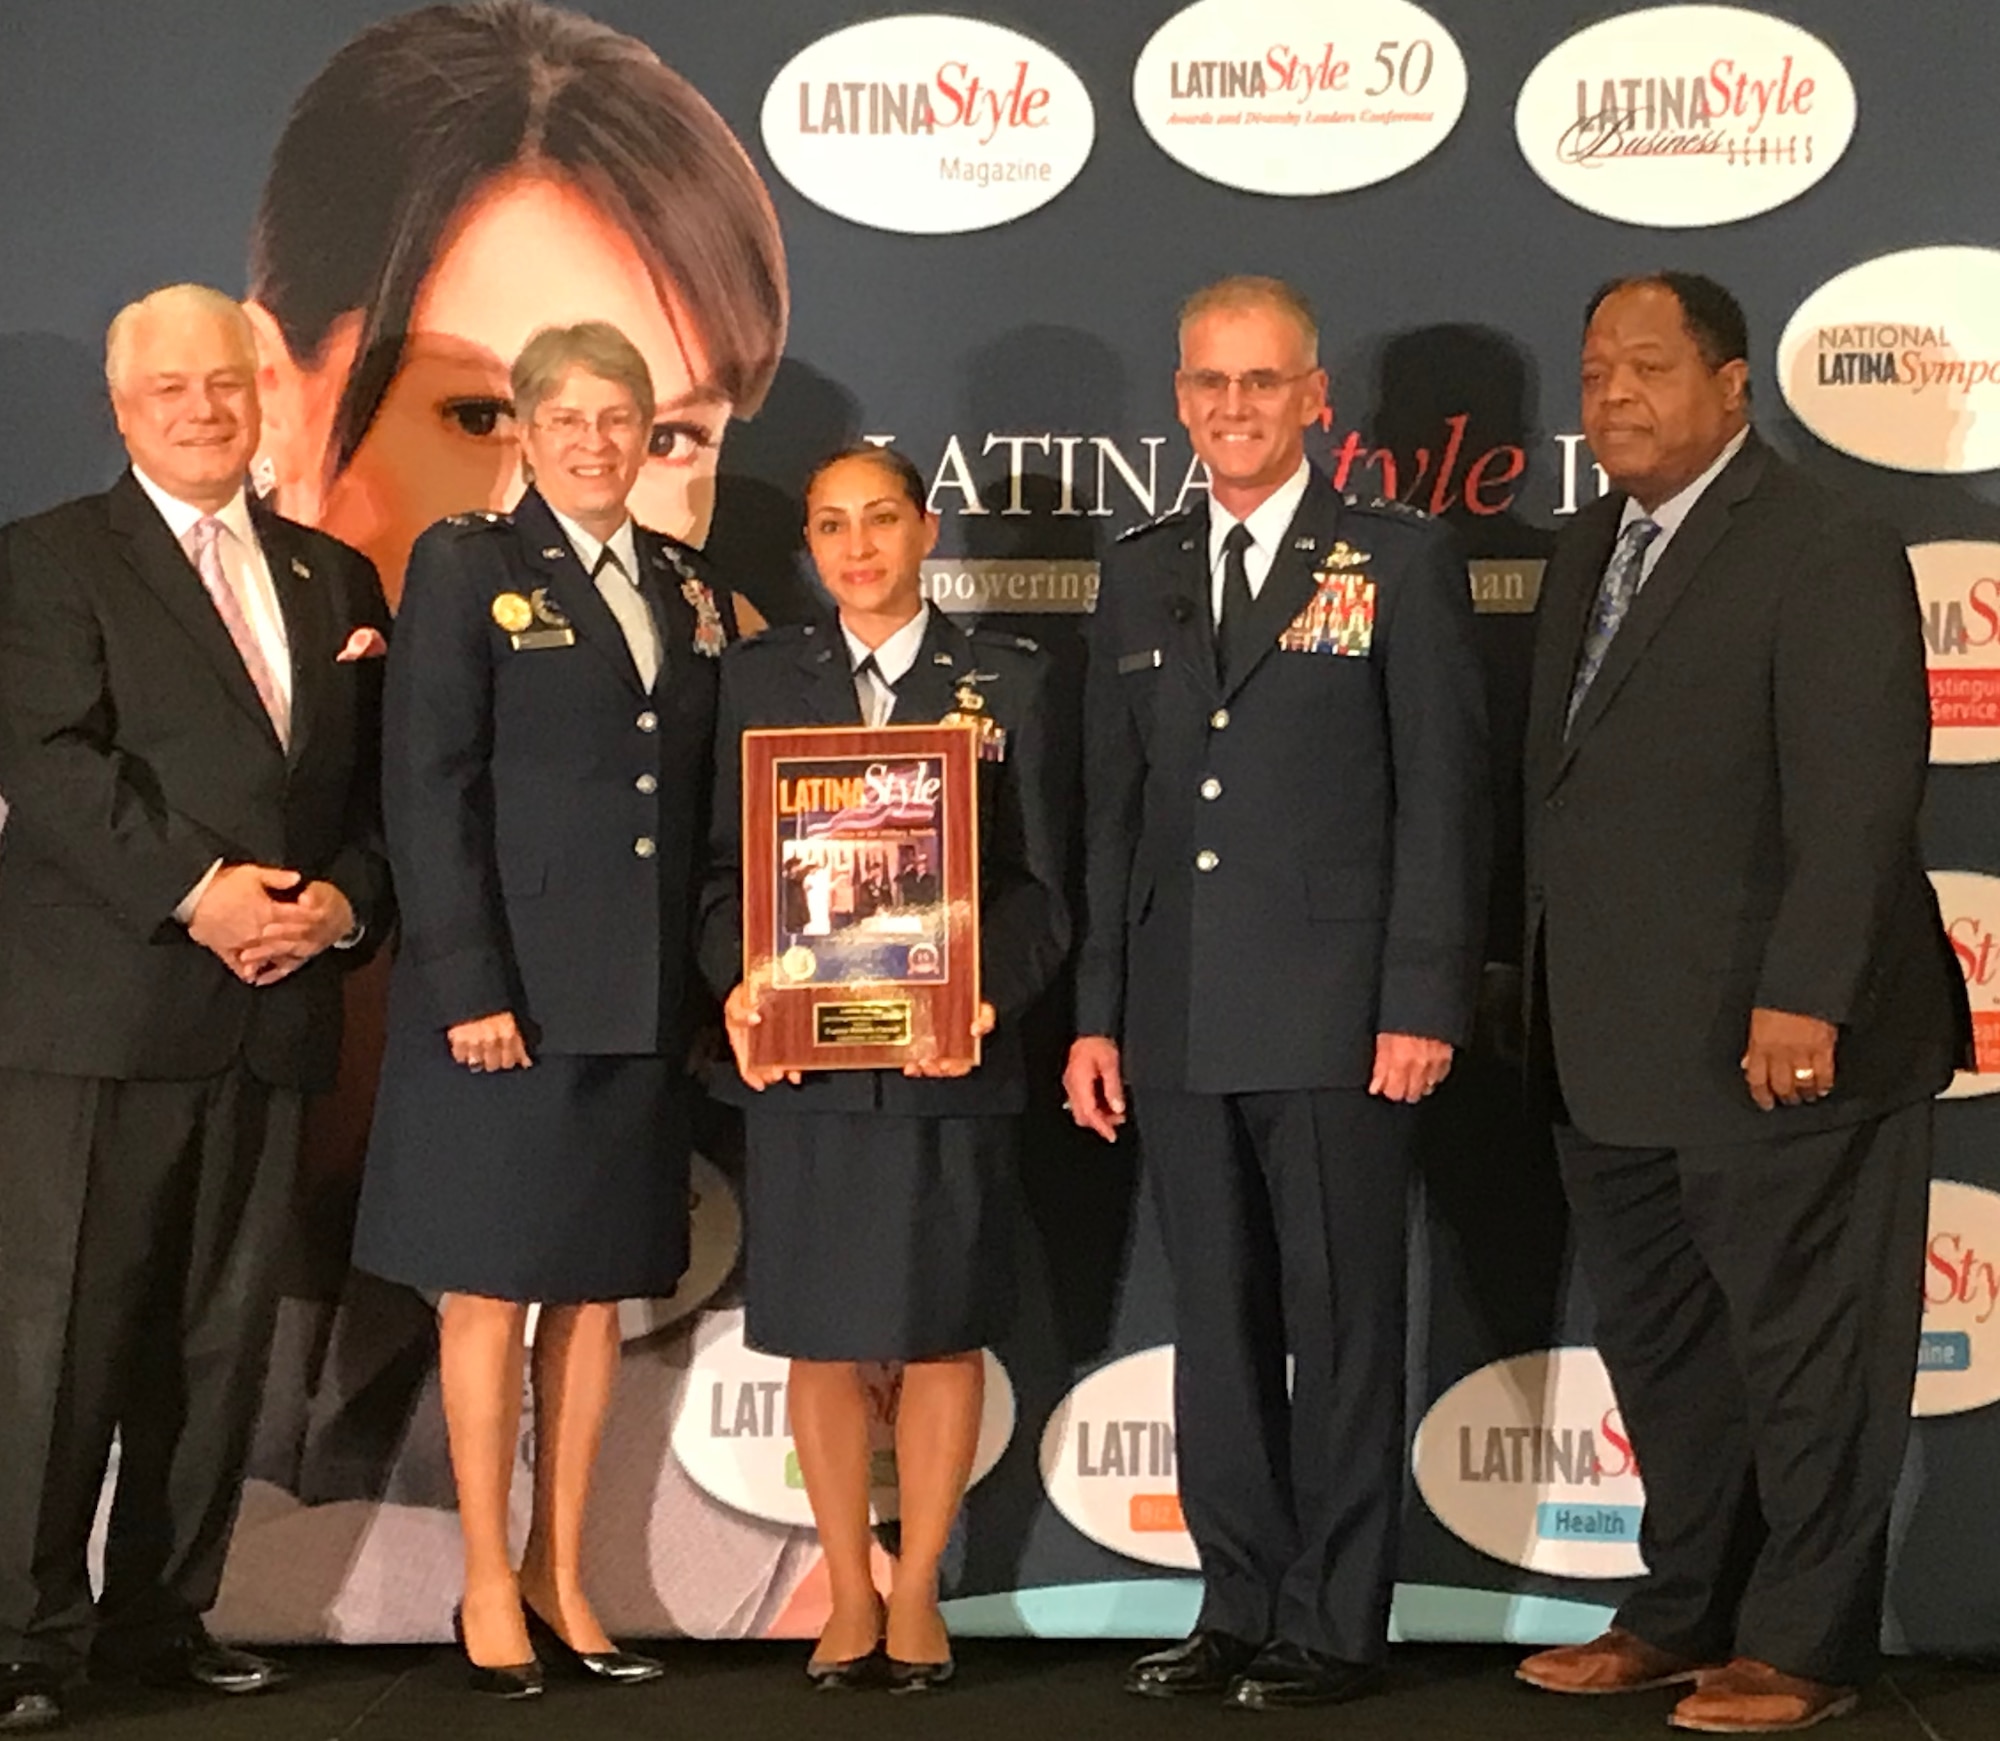 U.S Air Force Capt. Michelle Cazares poses with leadership for a Latina Style Distinguished Military Service Award ceremony in Washington D.C.